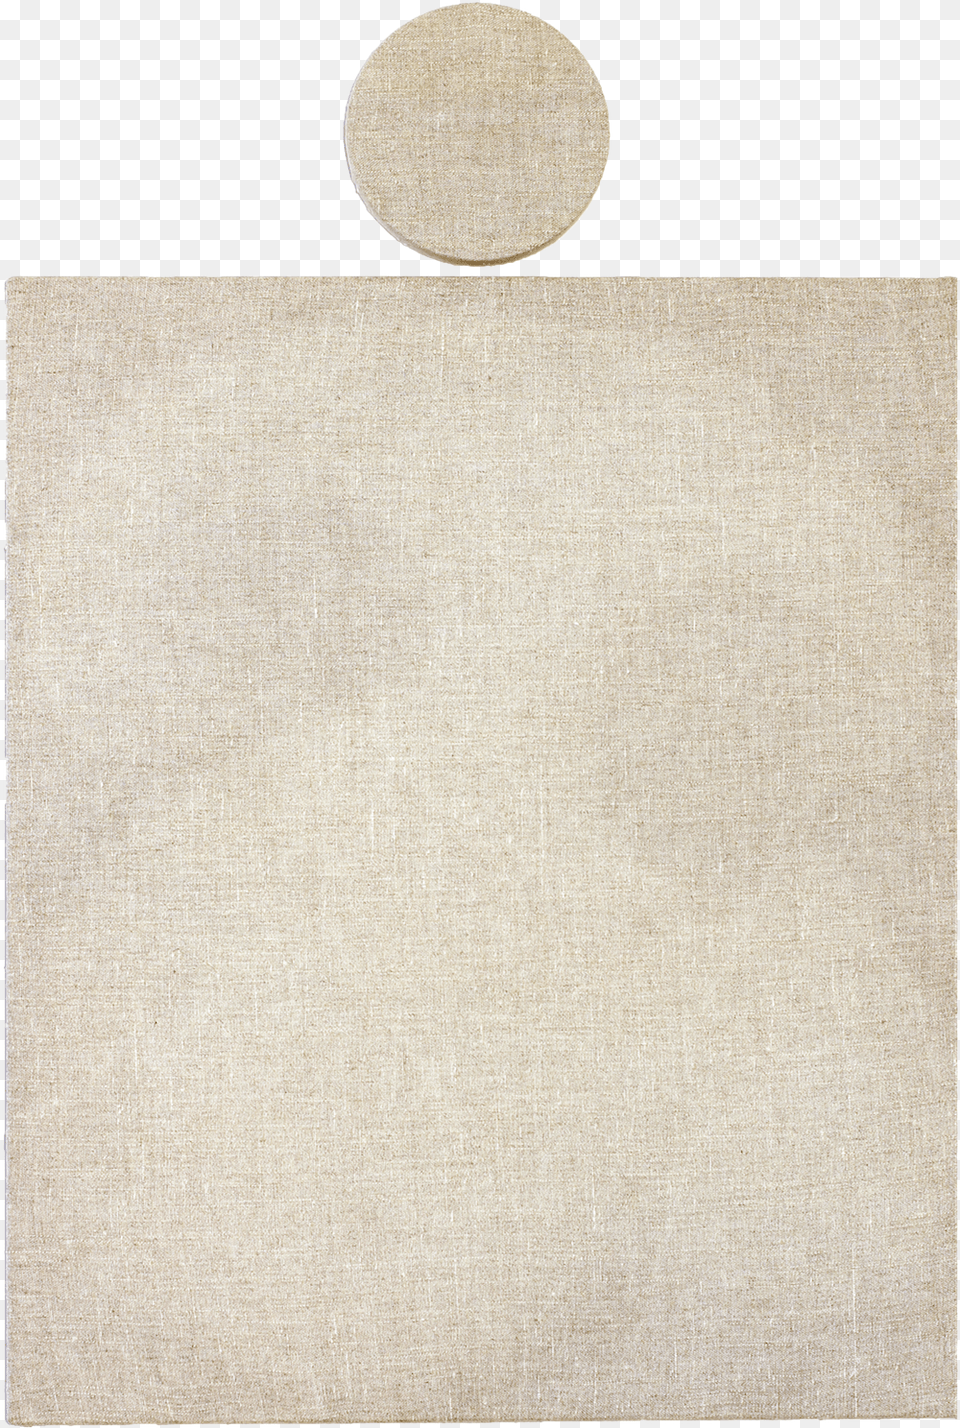 Untitled With A Circle Circle, Home Decor, Linen, Texture, Canvas Png Image